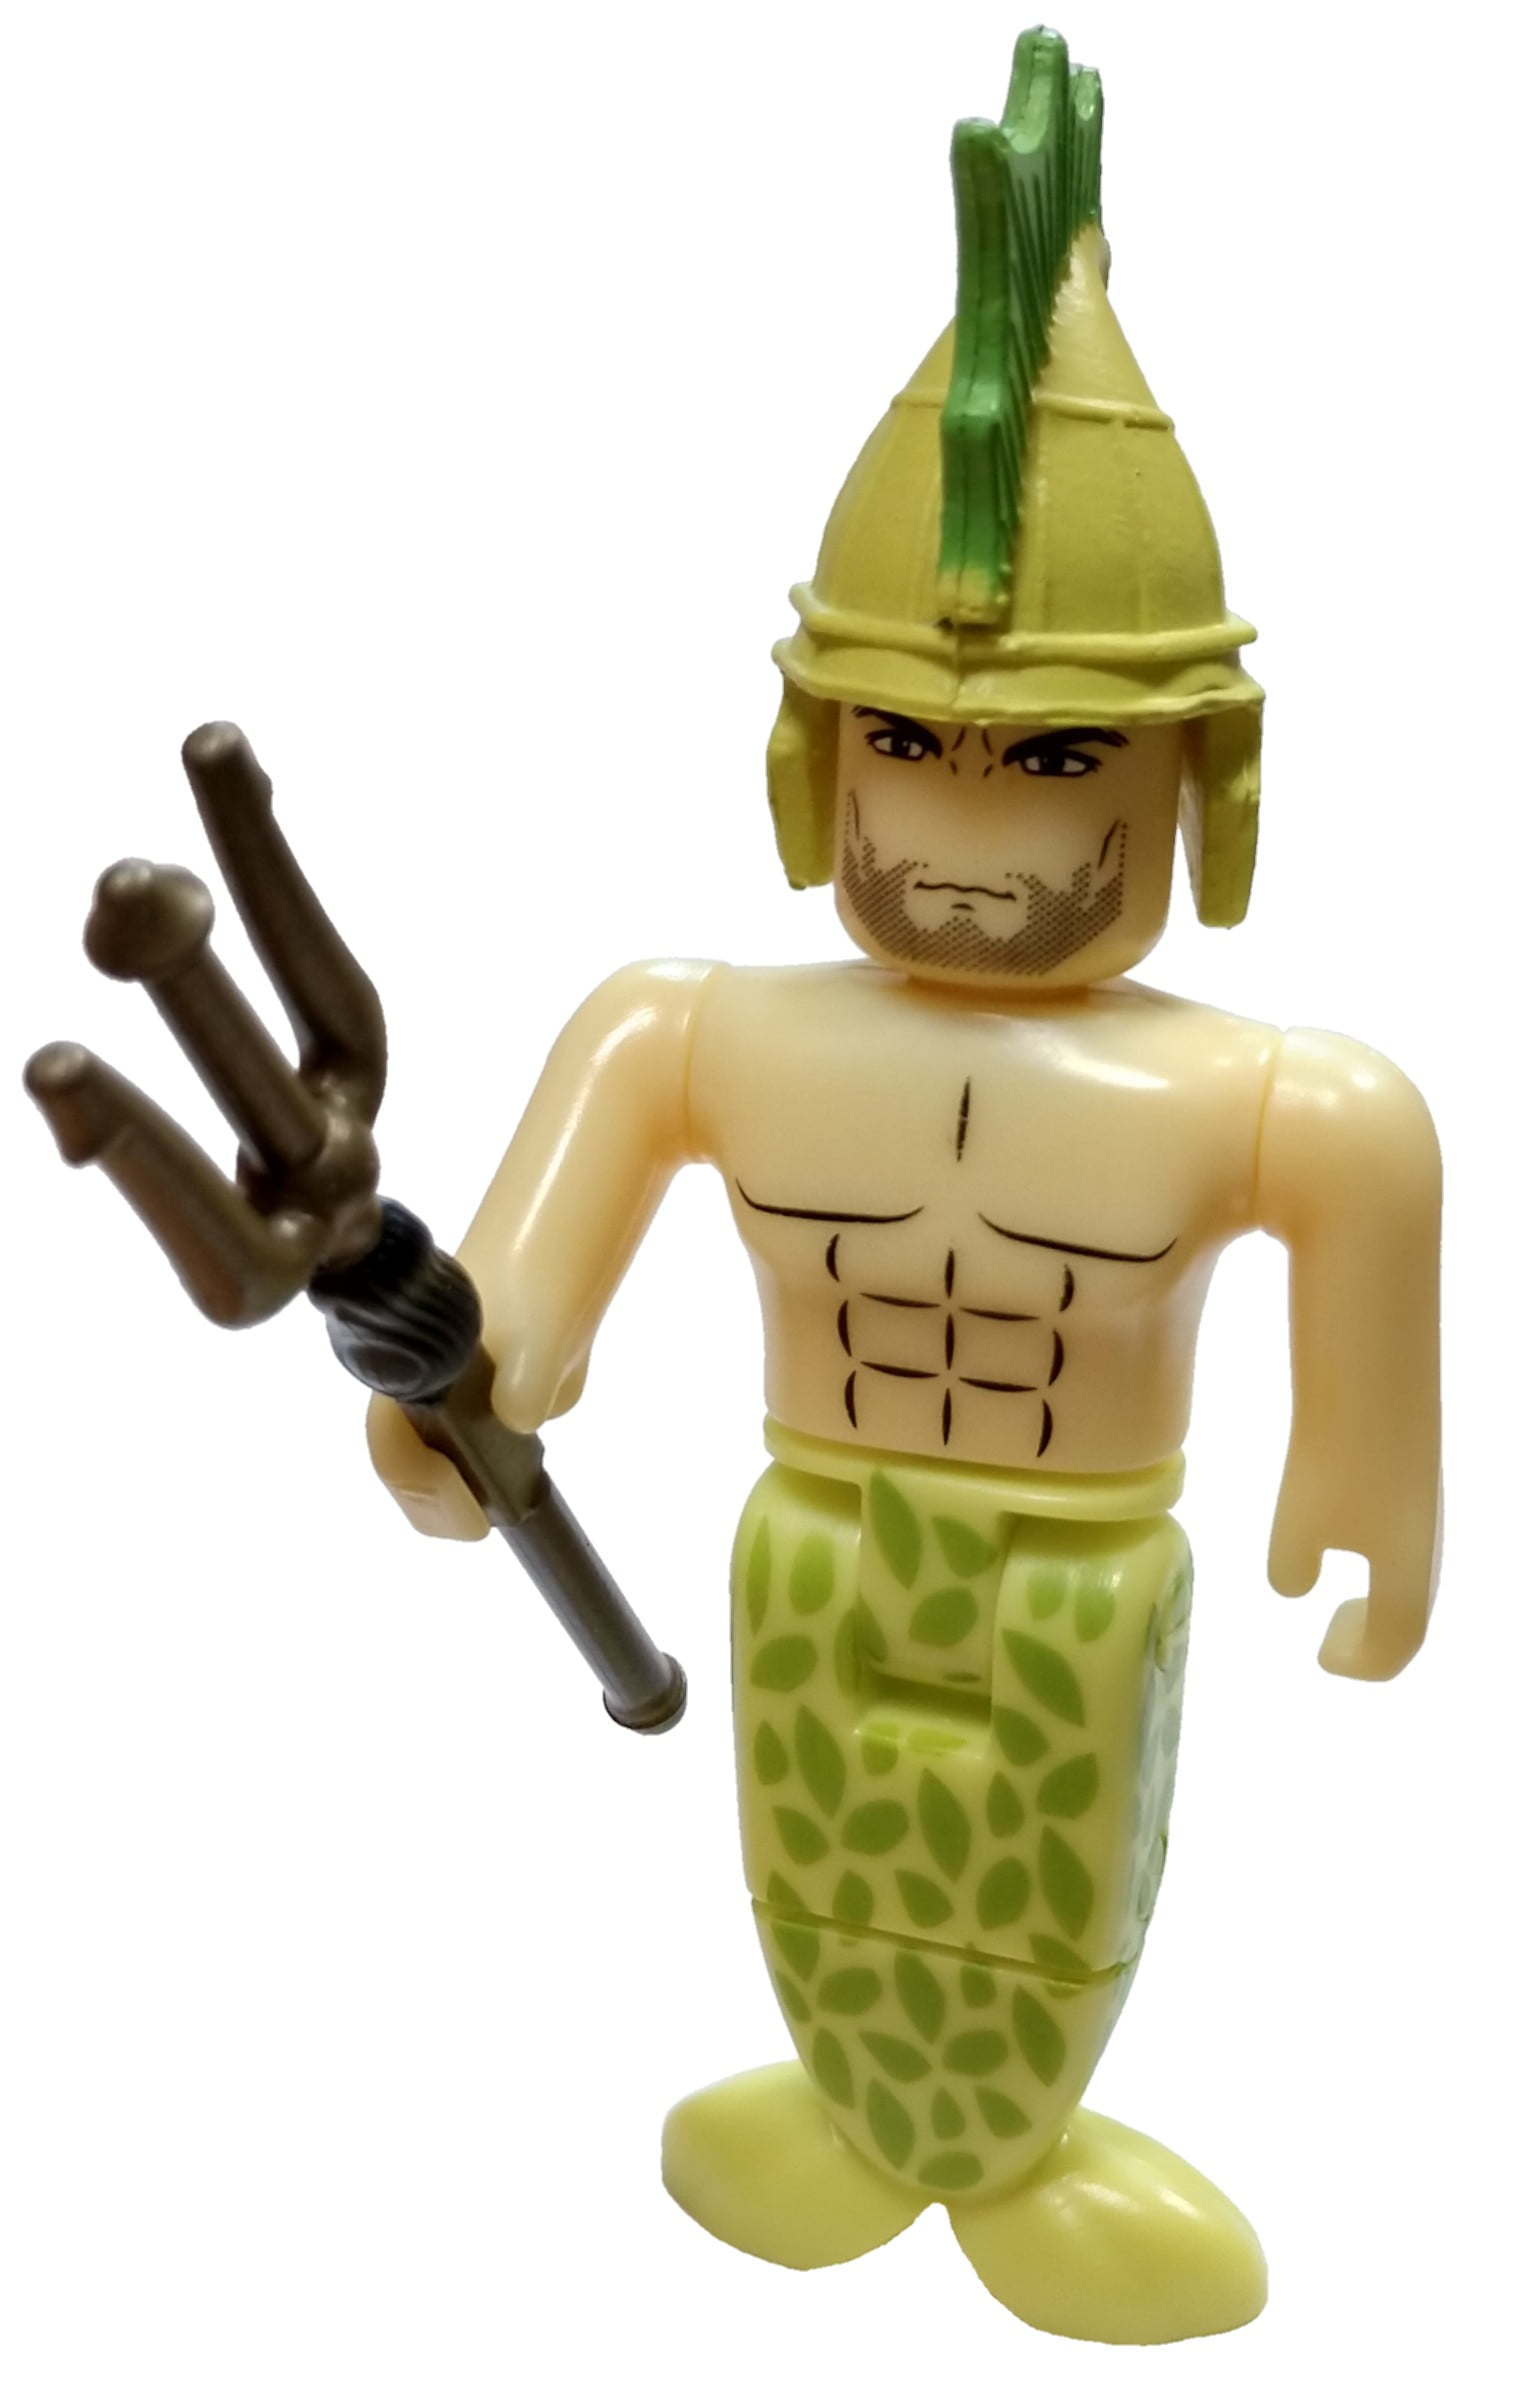 Roblox Red Series 4 Neverland Lagoon Epic Merman Mini Figure With Red Cube And Online Code No Packaging Walmart Com Walmart Com - details about roblox neverland lagoon 4 figure pack virtual item code brand new